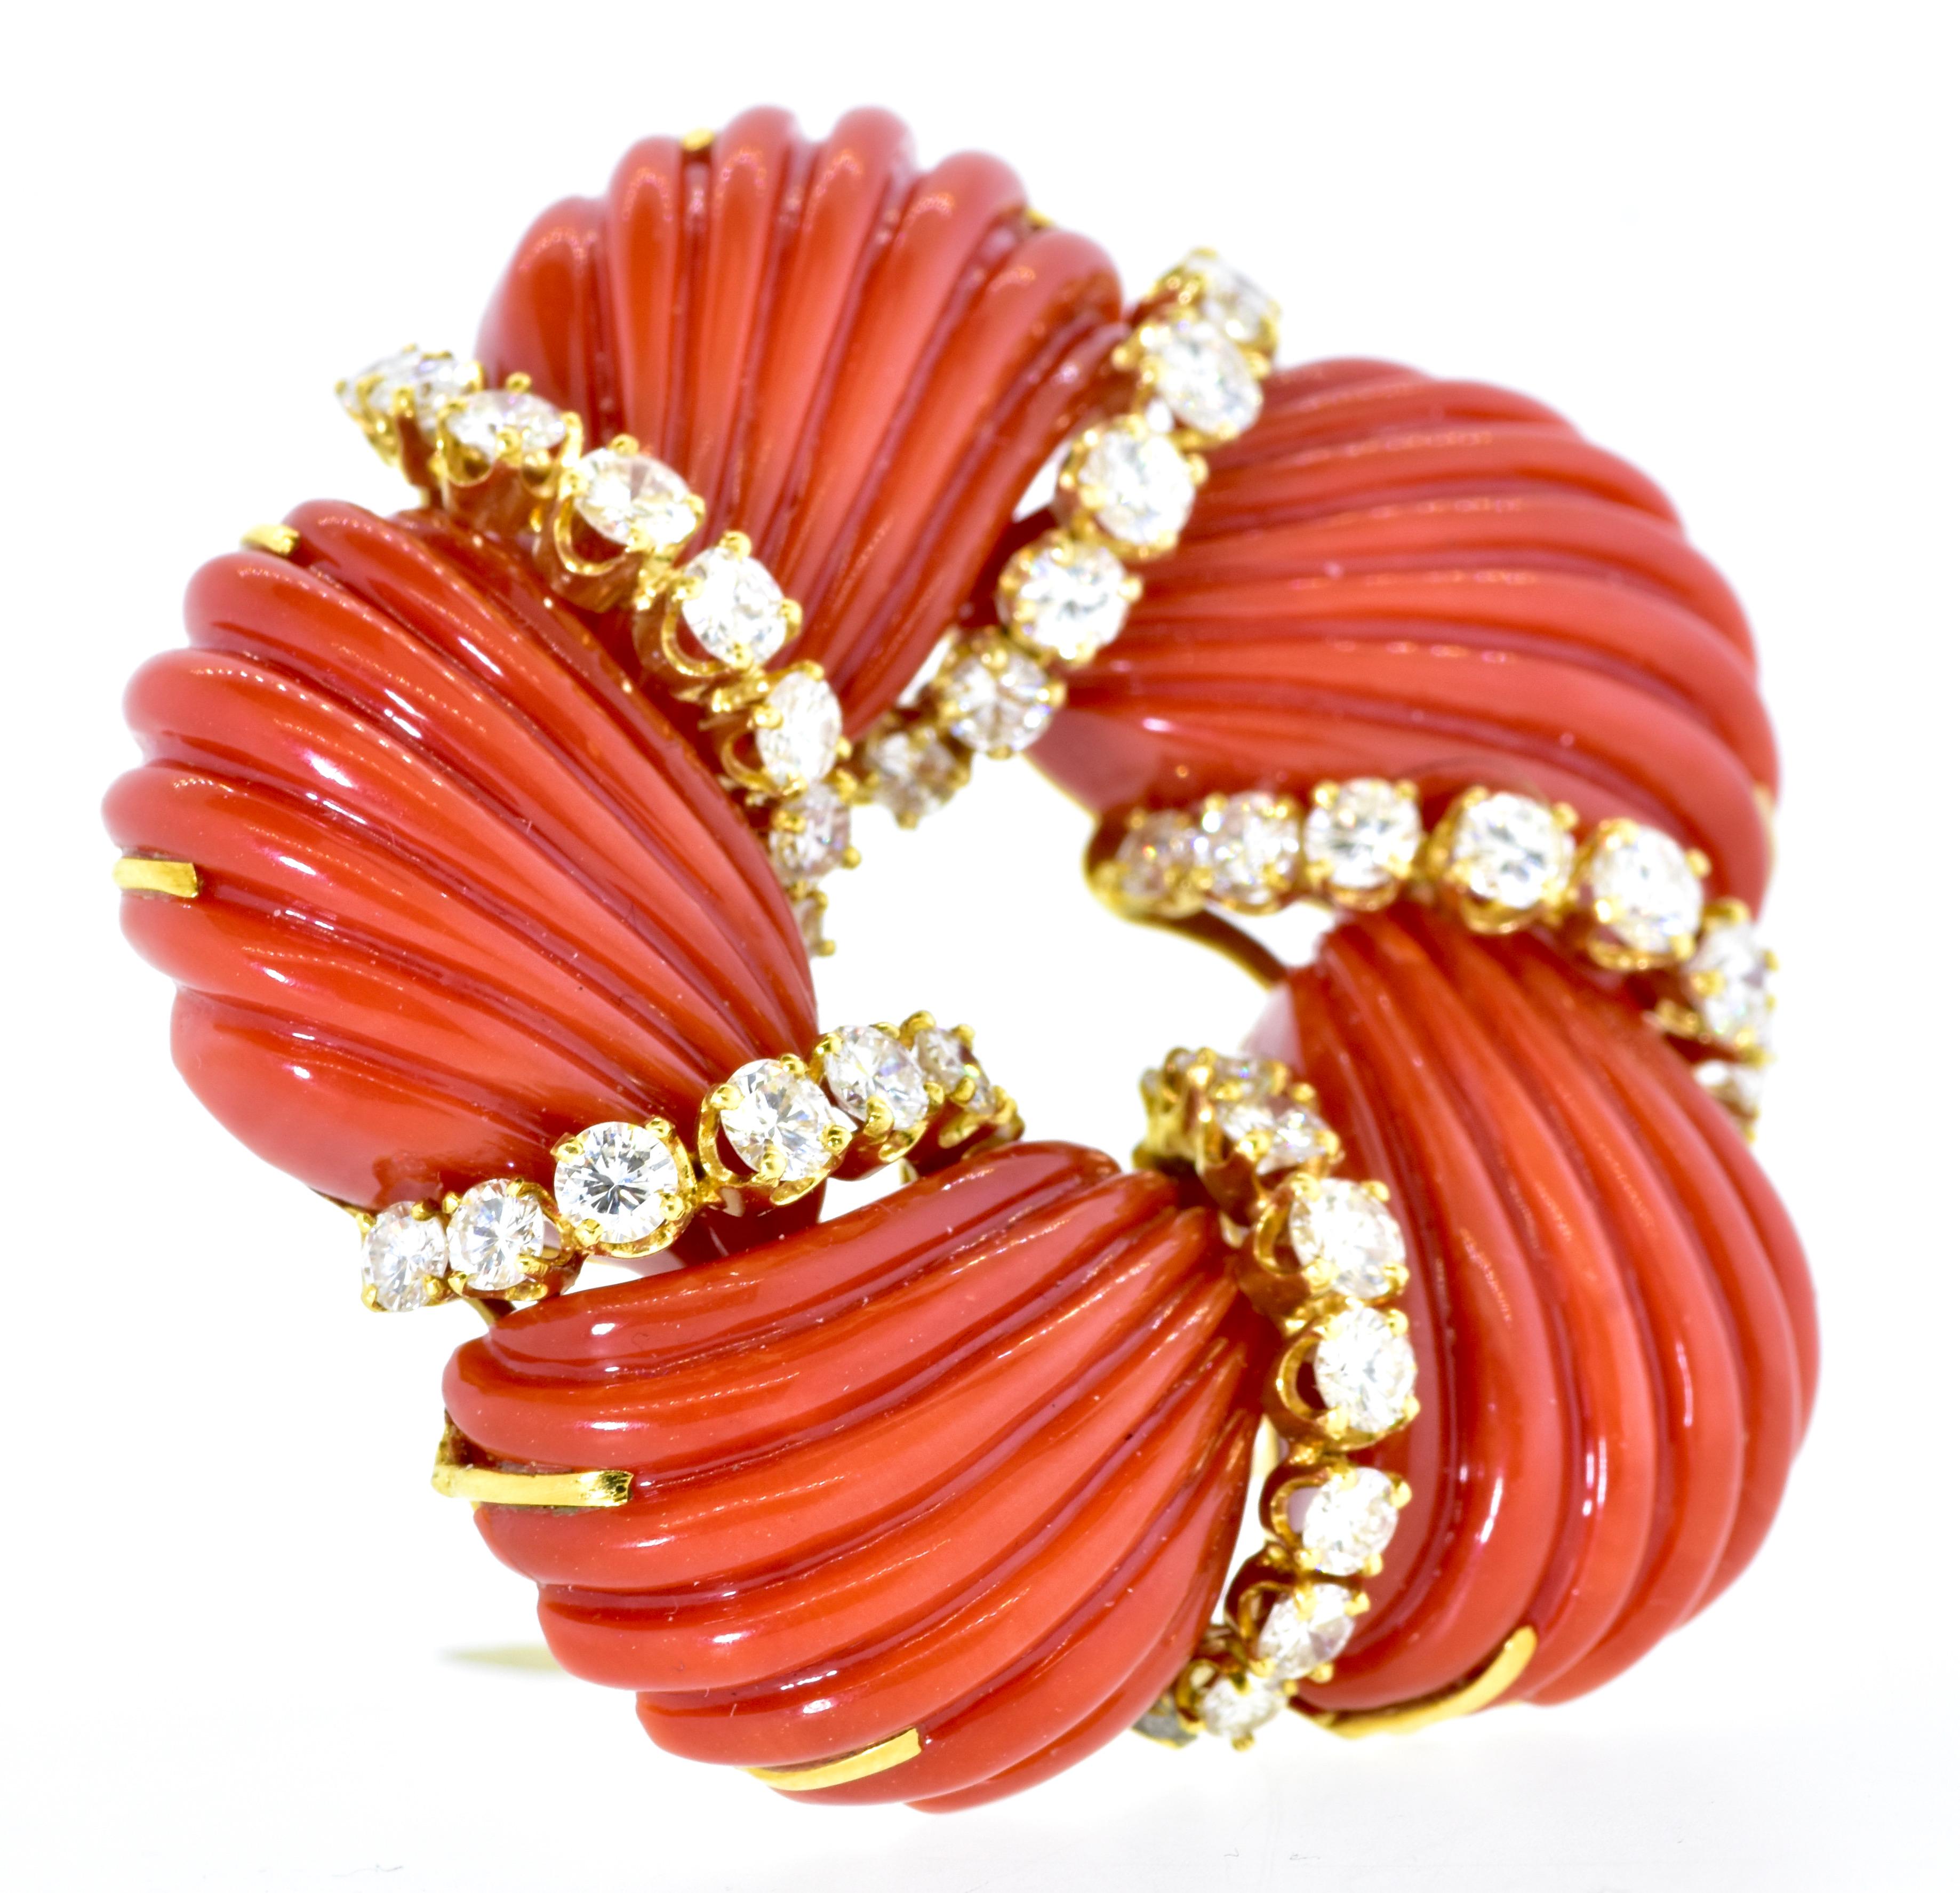 Tiffany & Company diamond and orange-red (oxblood) natural coral which has been hand cut and carved.  The white brilliant cut diamonds are as fine as one would expect from the famous American House of Tiffany & Co. - especially at this time when